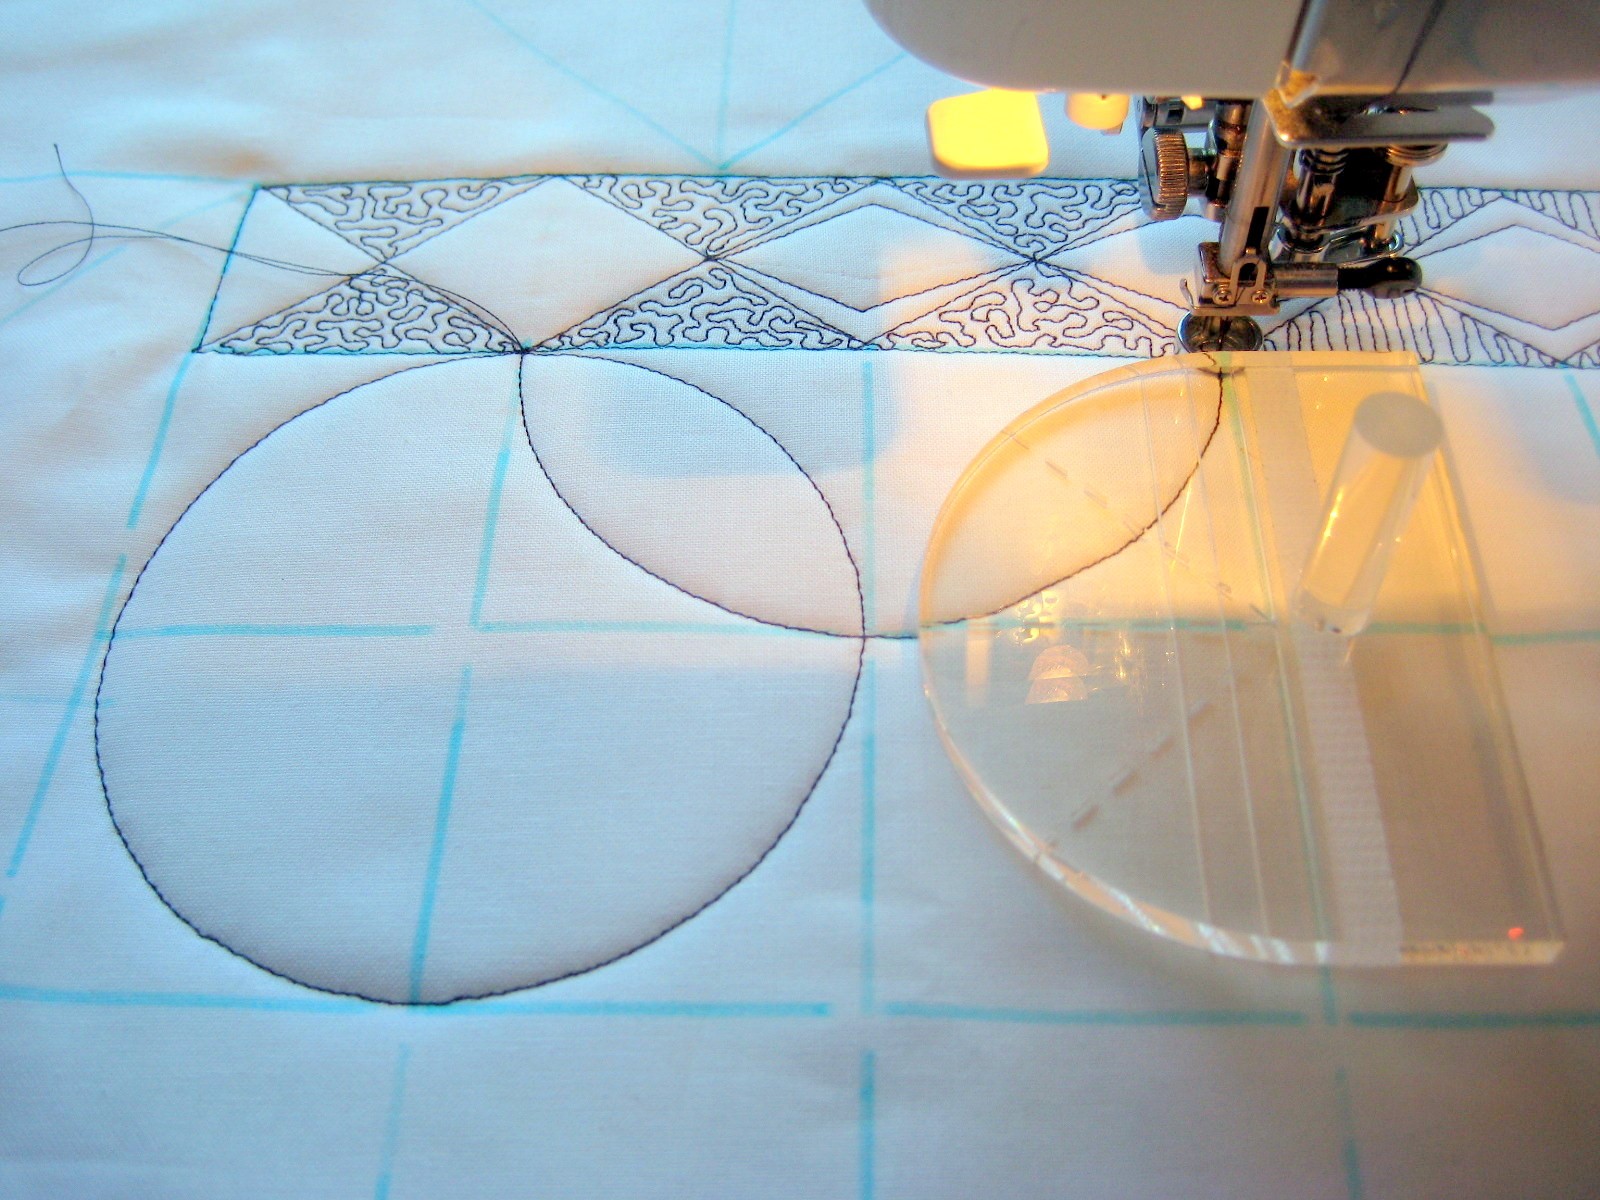 Quilting Templates for Machine Quilting, Thick Acrylic Using